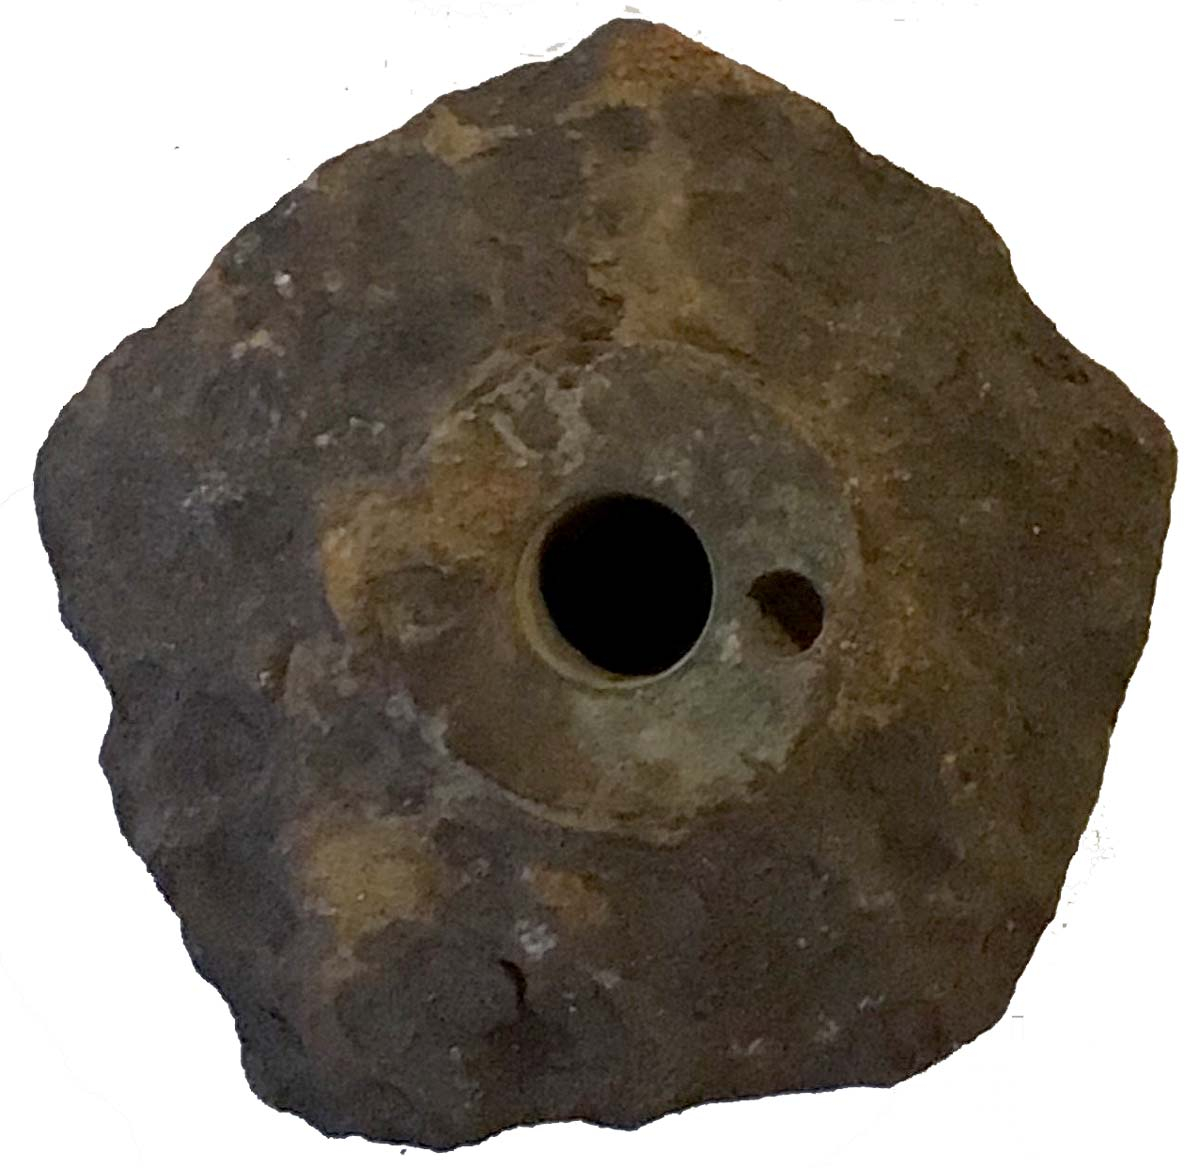 CONFEDERATE FUSE ADAPTER/SHELL FRAGMENT RECOVERED IN ATLANTA, GA